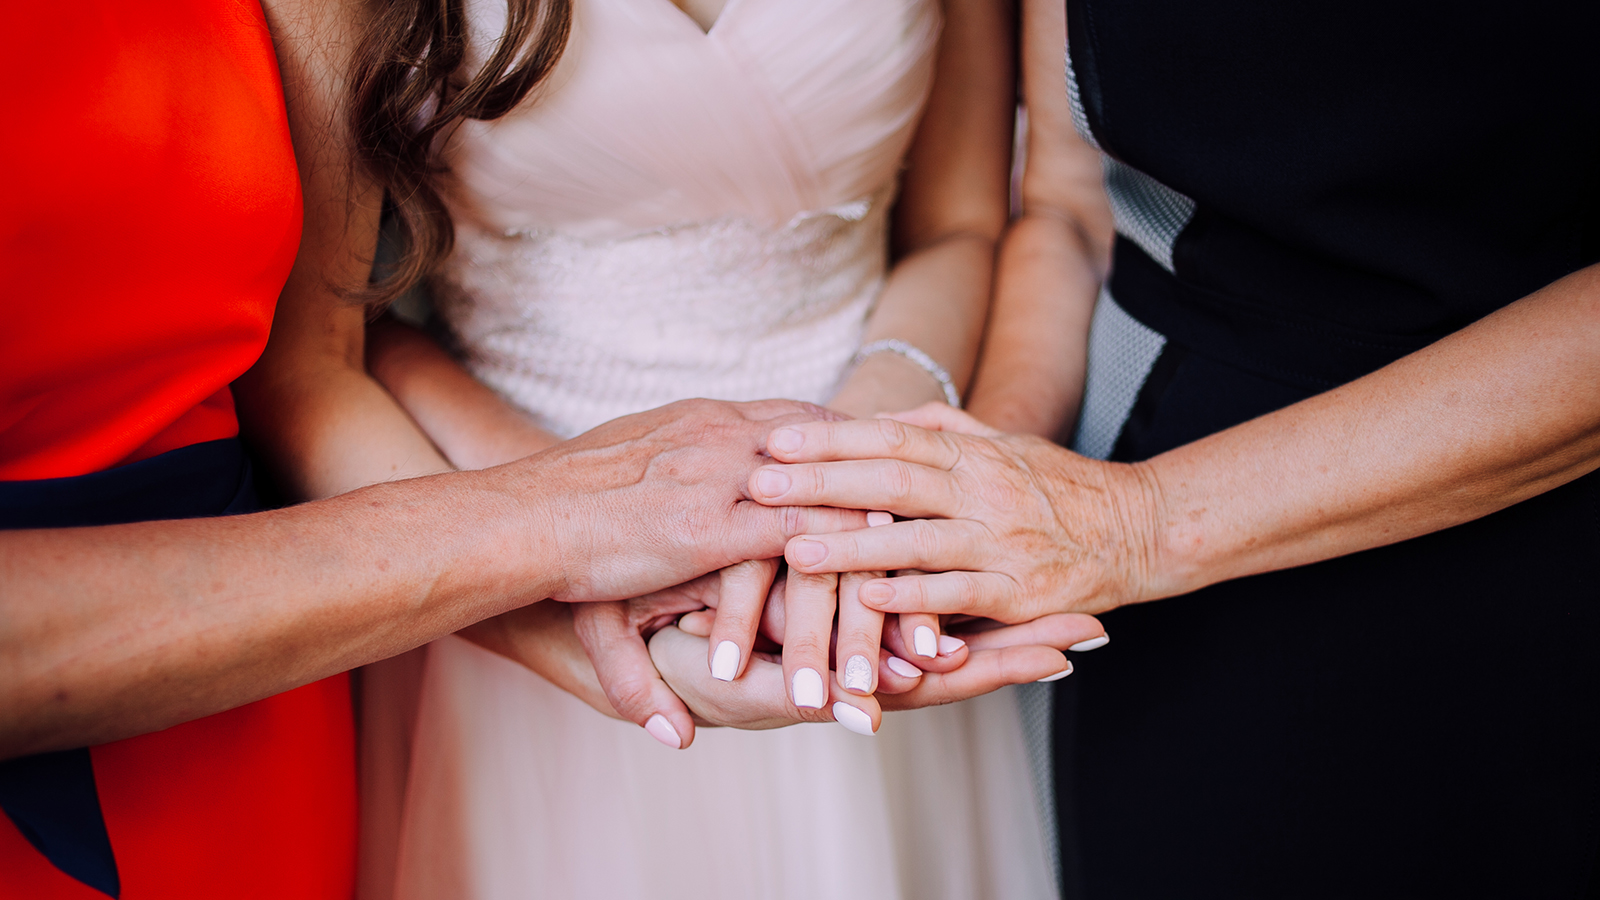 Mother, bride, mother-in-law holding hands. Wedding. The concept of love.